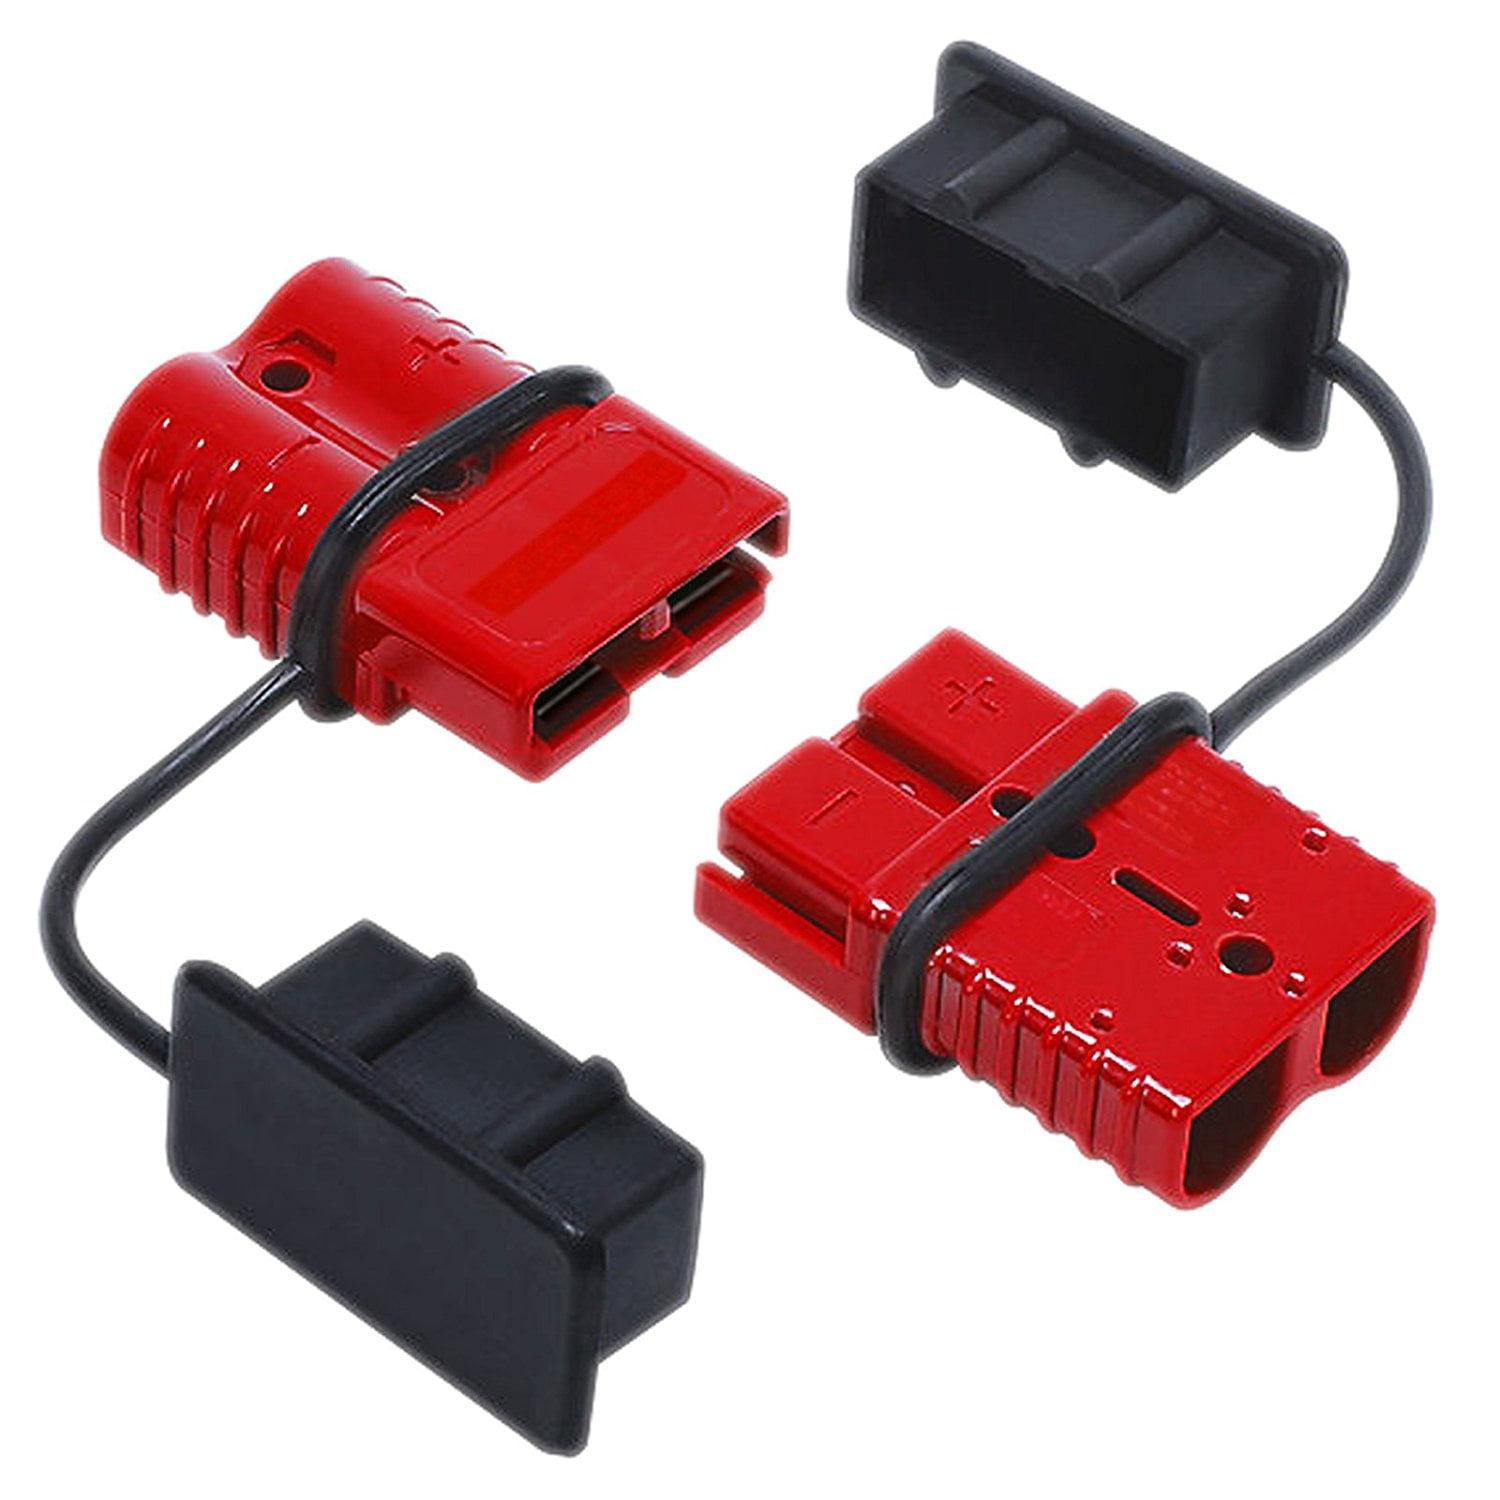 Ayleid Battery Quick Connect Disconnect Electrical Plug 2-4 Gauge 175 Amps for Recovery Winch or Trailer